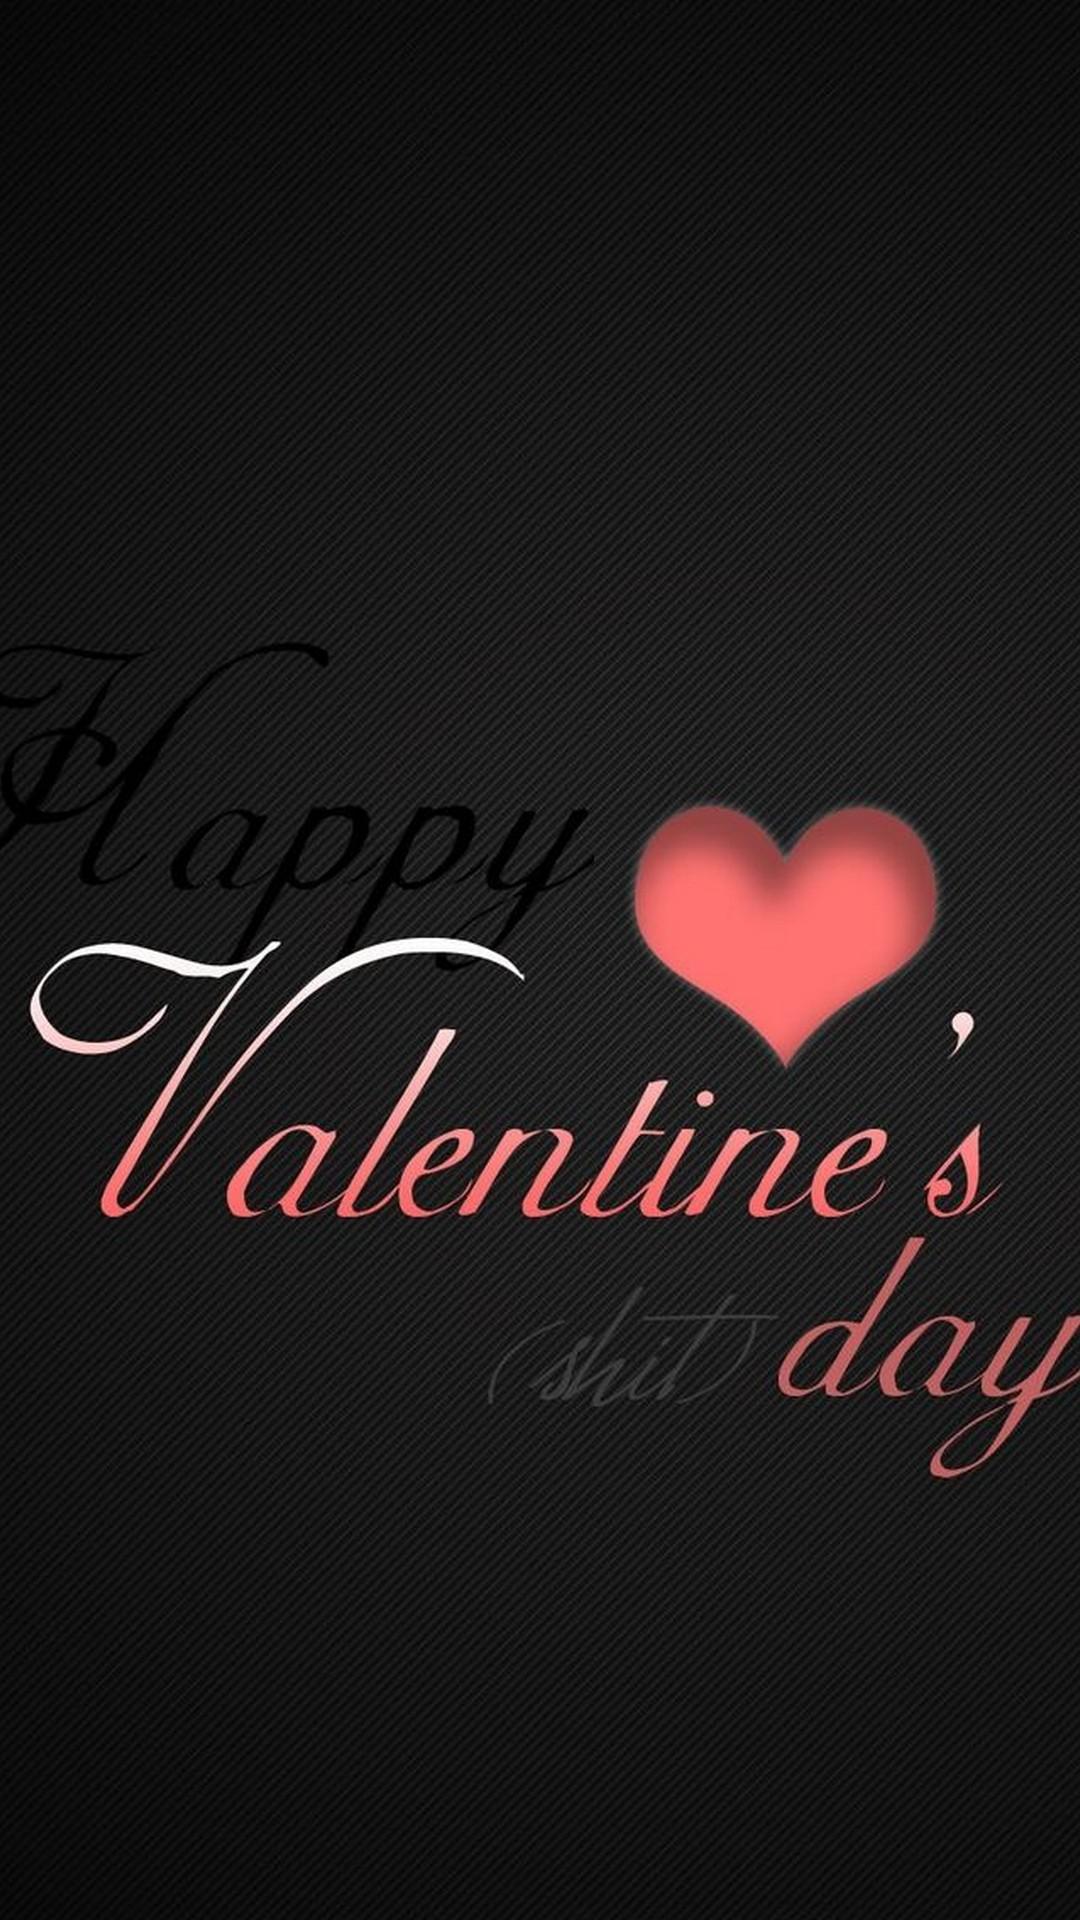 Happy Valentines Day Image Wallpaper Android Android Wallpaper